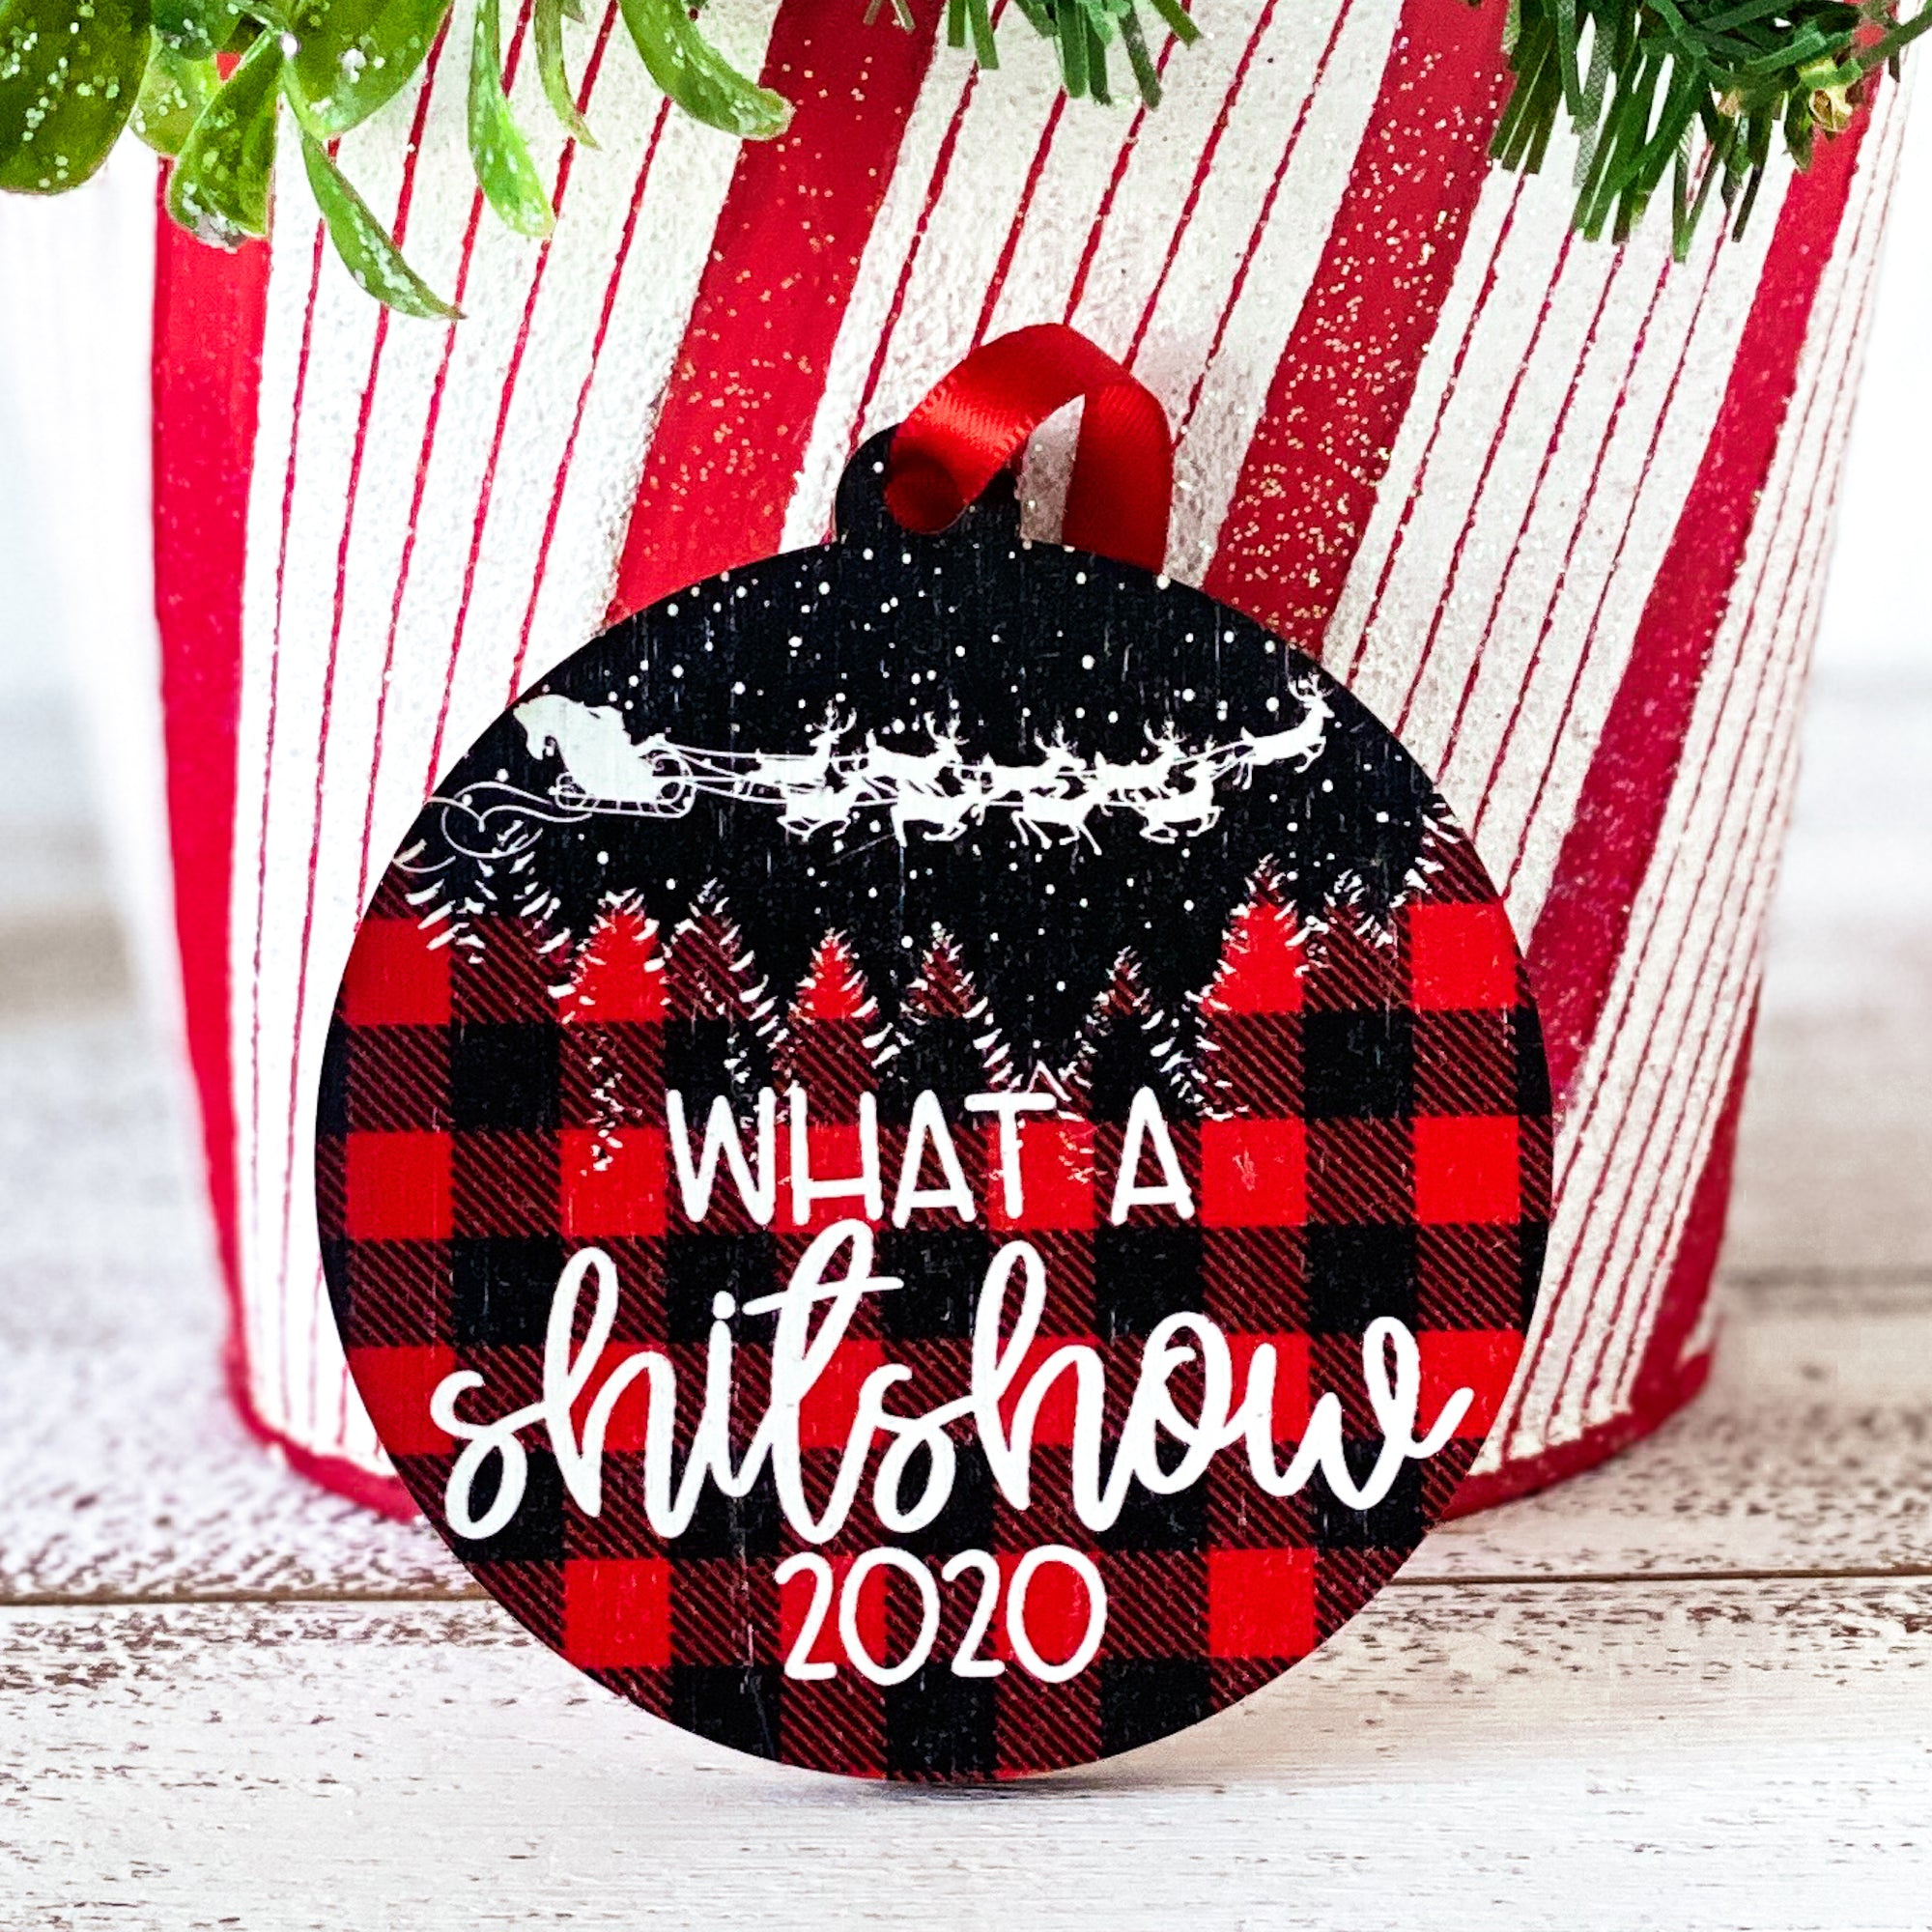 What a shitshow on round ornament. Red and black buffalo plaid background with Santa's sleigh